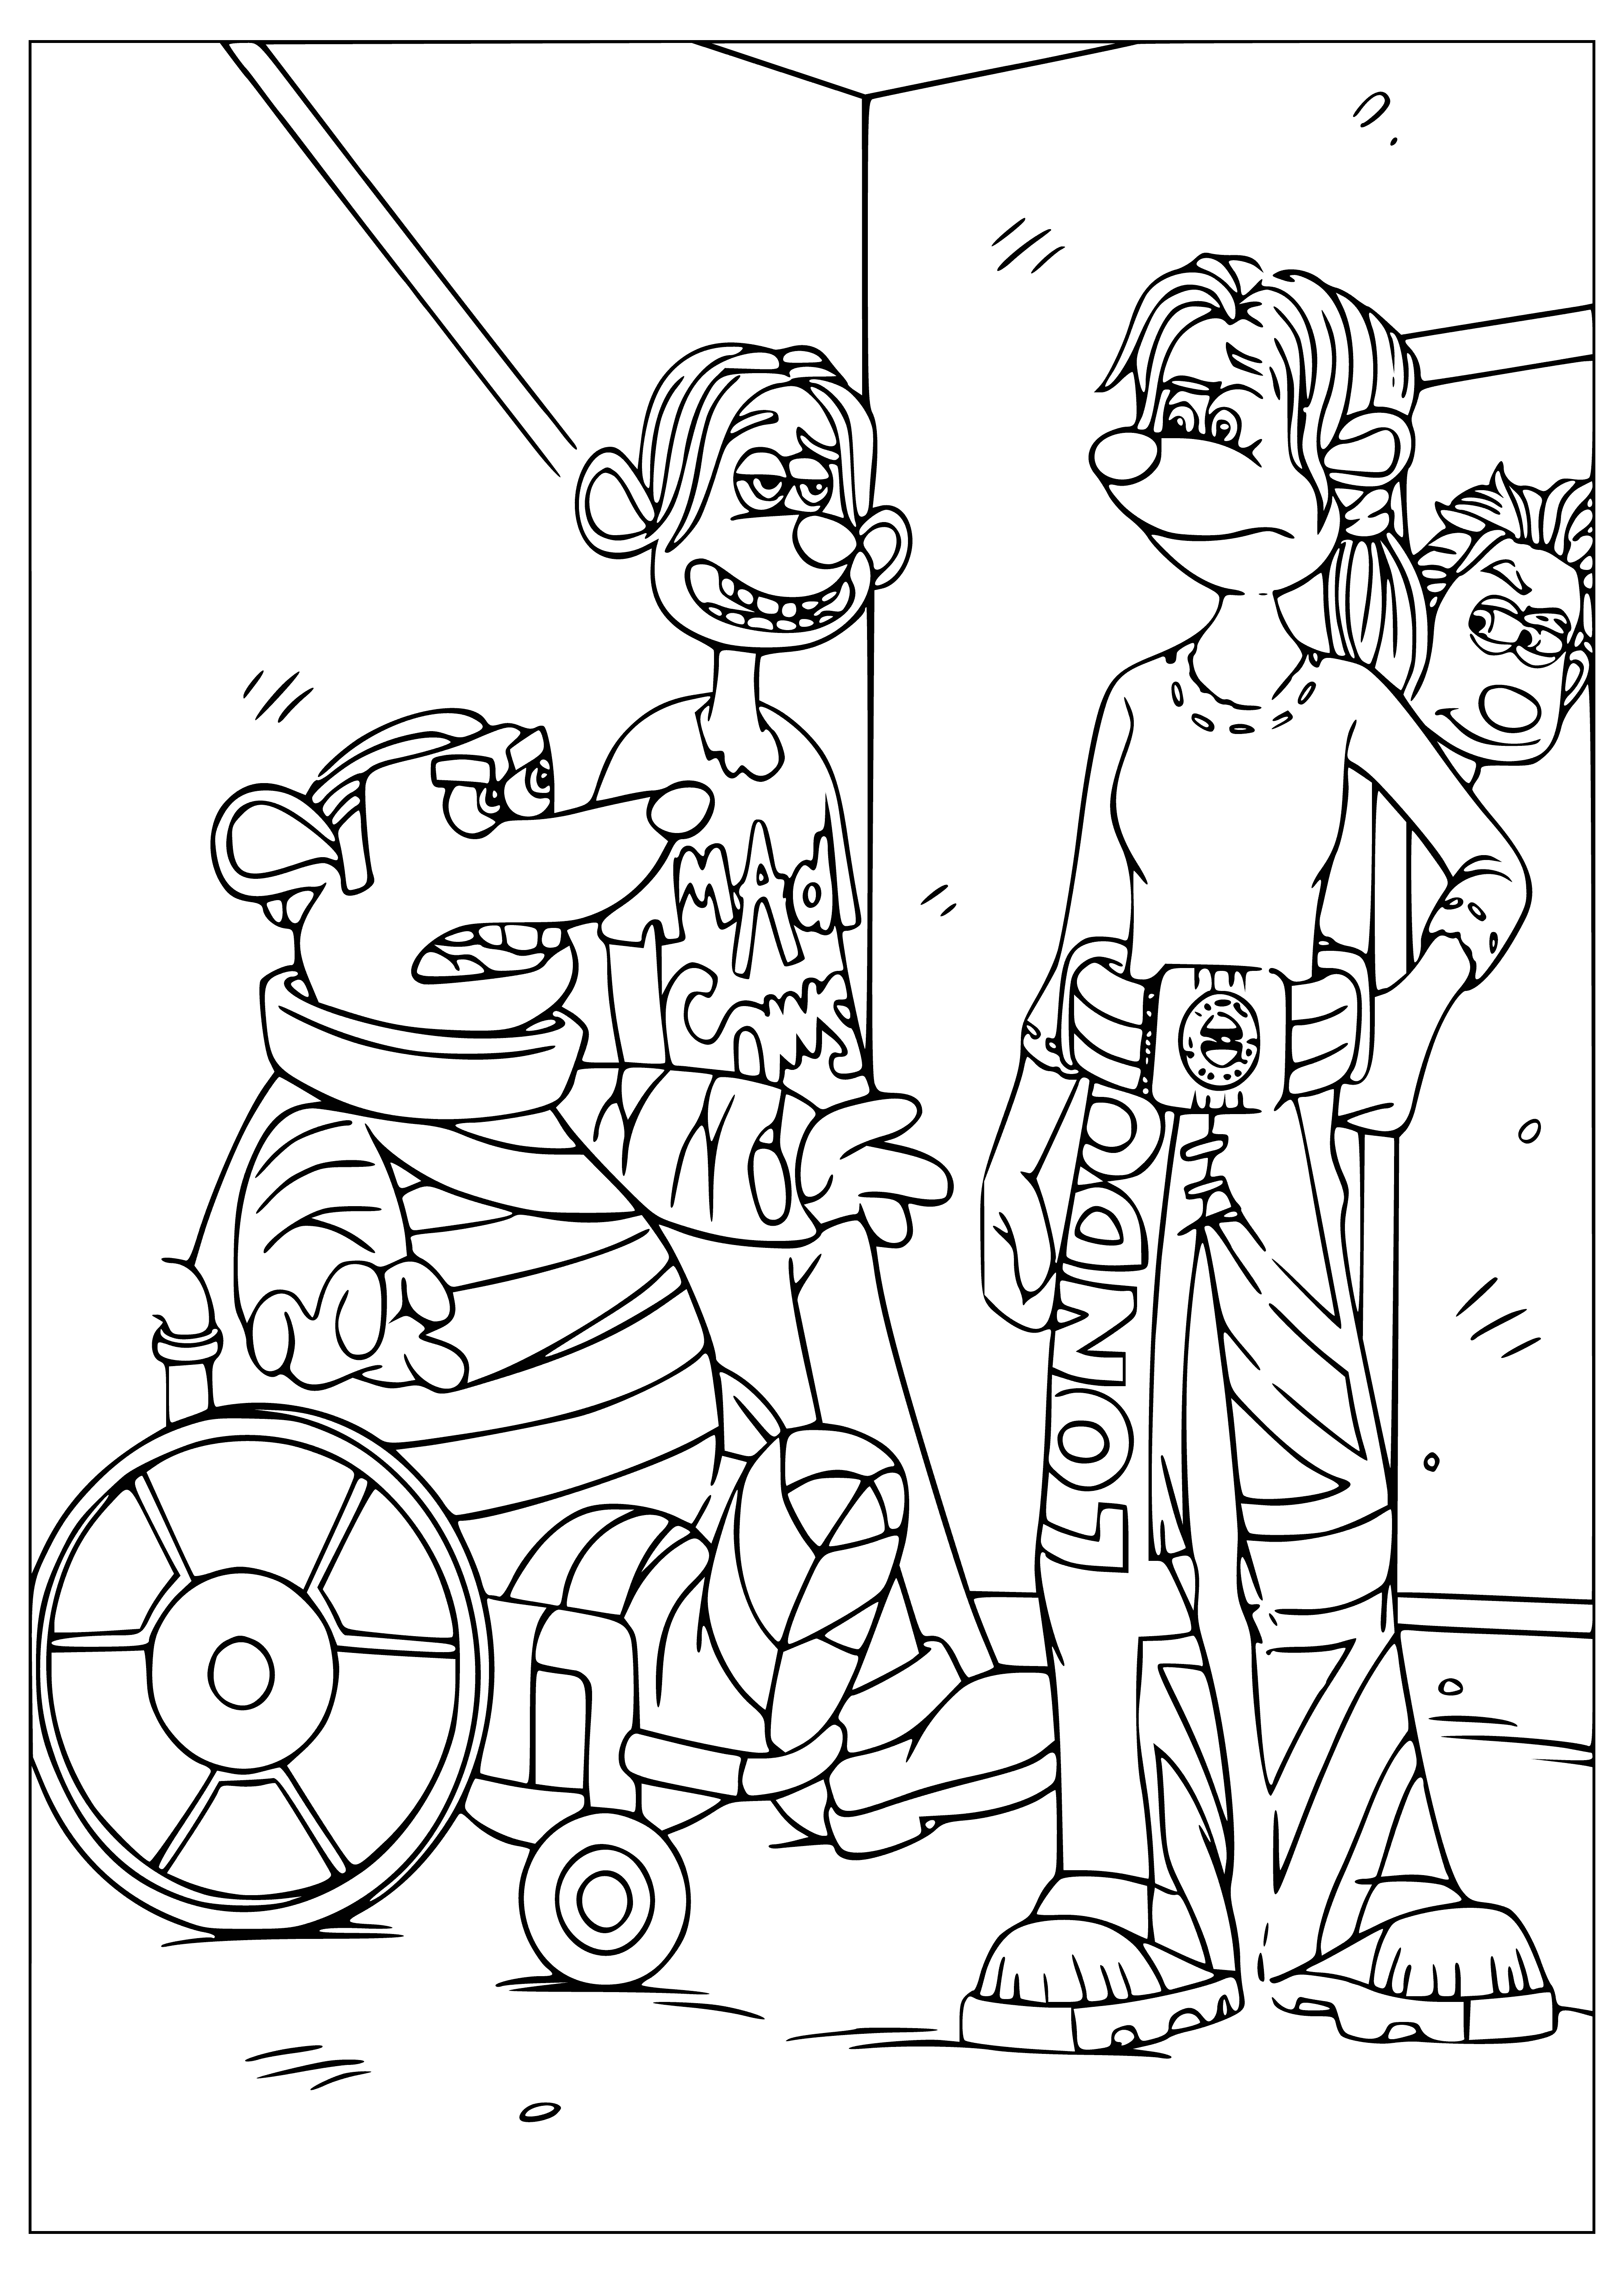 coloring page: Two rats in a scene from "Flushed Away" holding plungers, standing on large & small equipment.